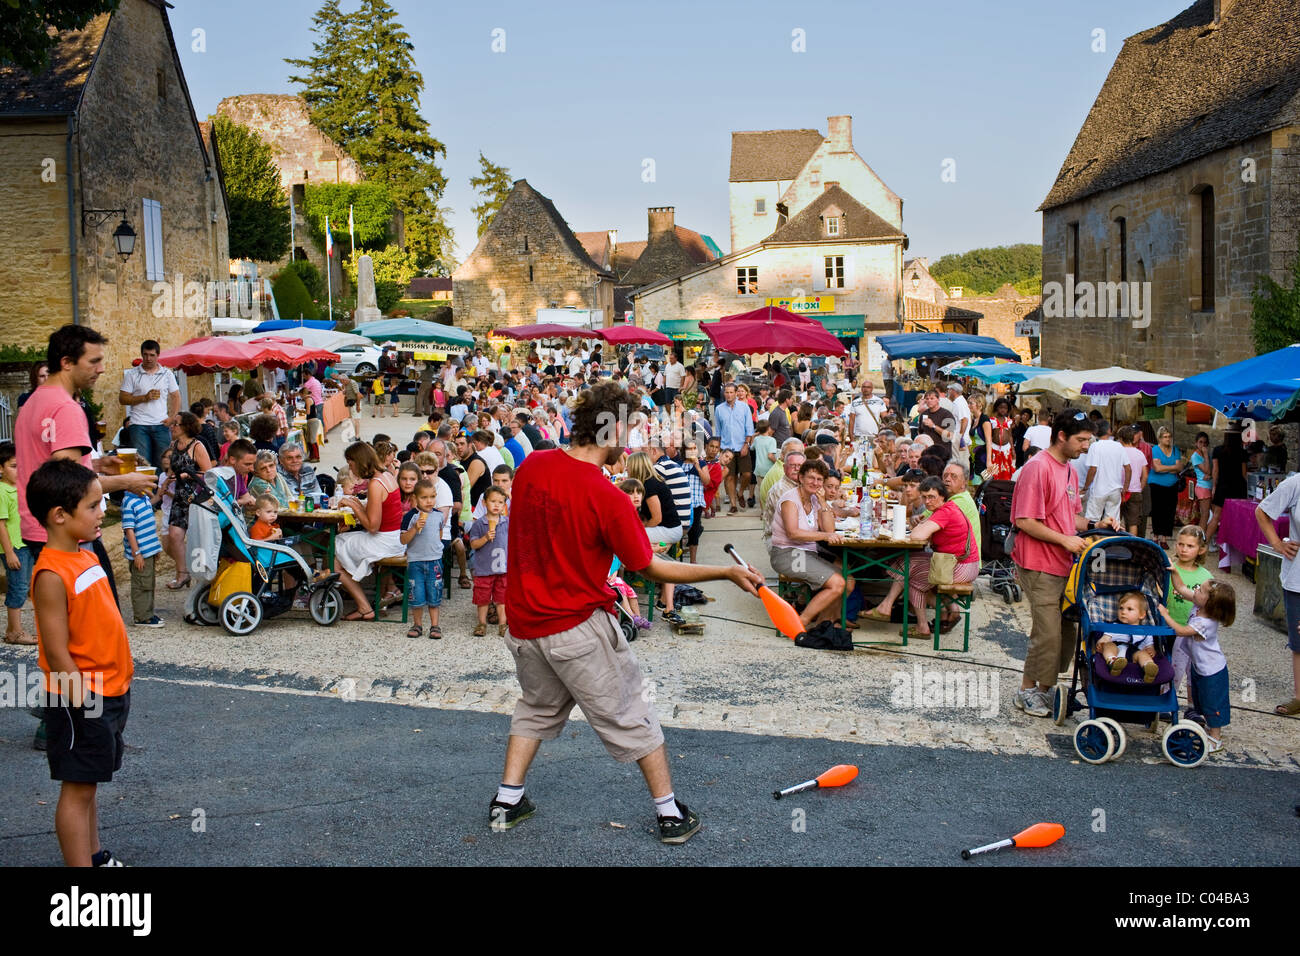 Juggler at village fete traditional festival in St Genies in the Perigord region, France Stock Photo